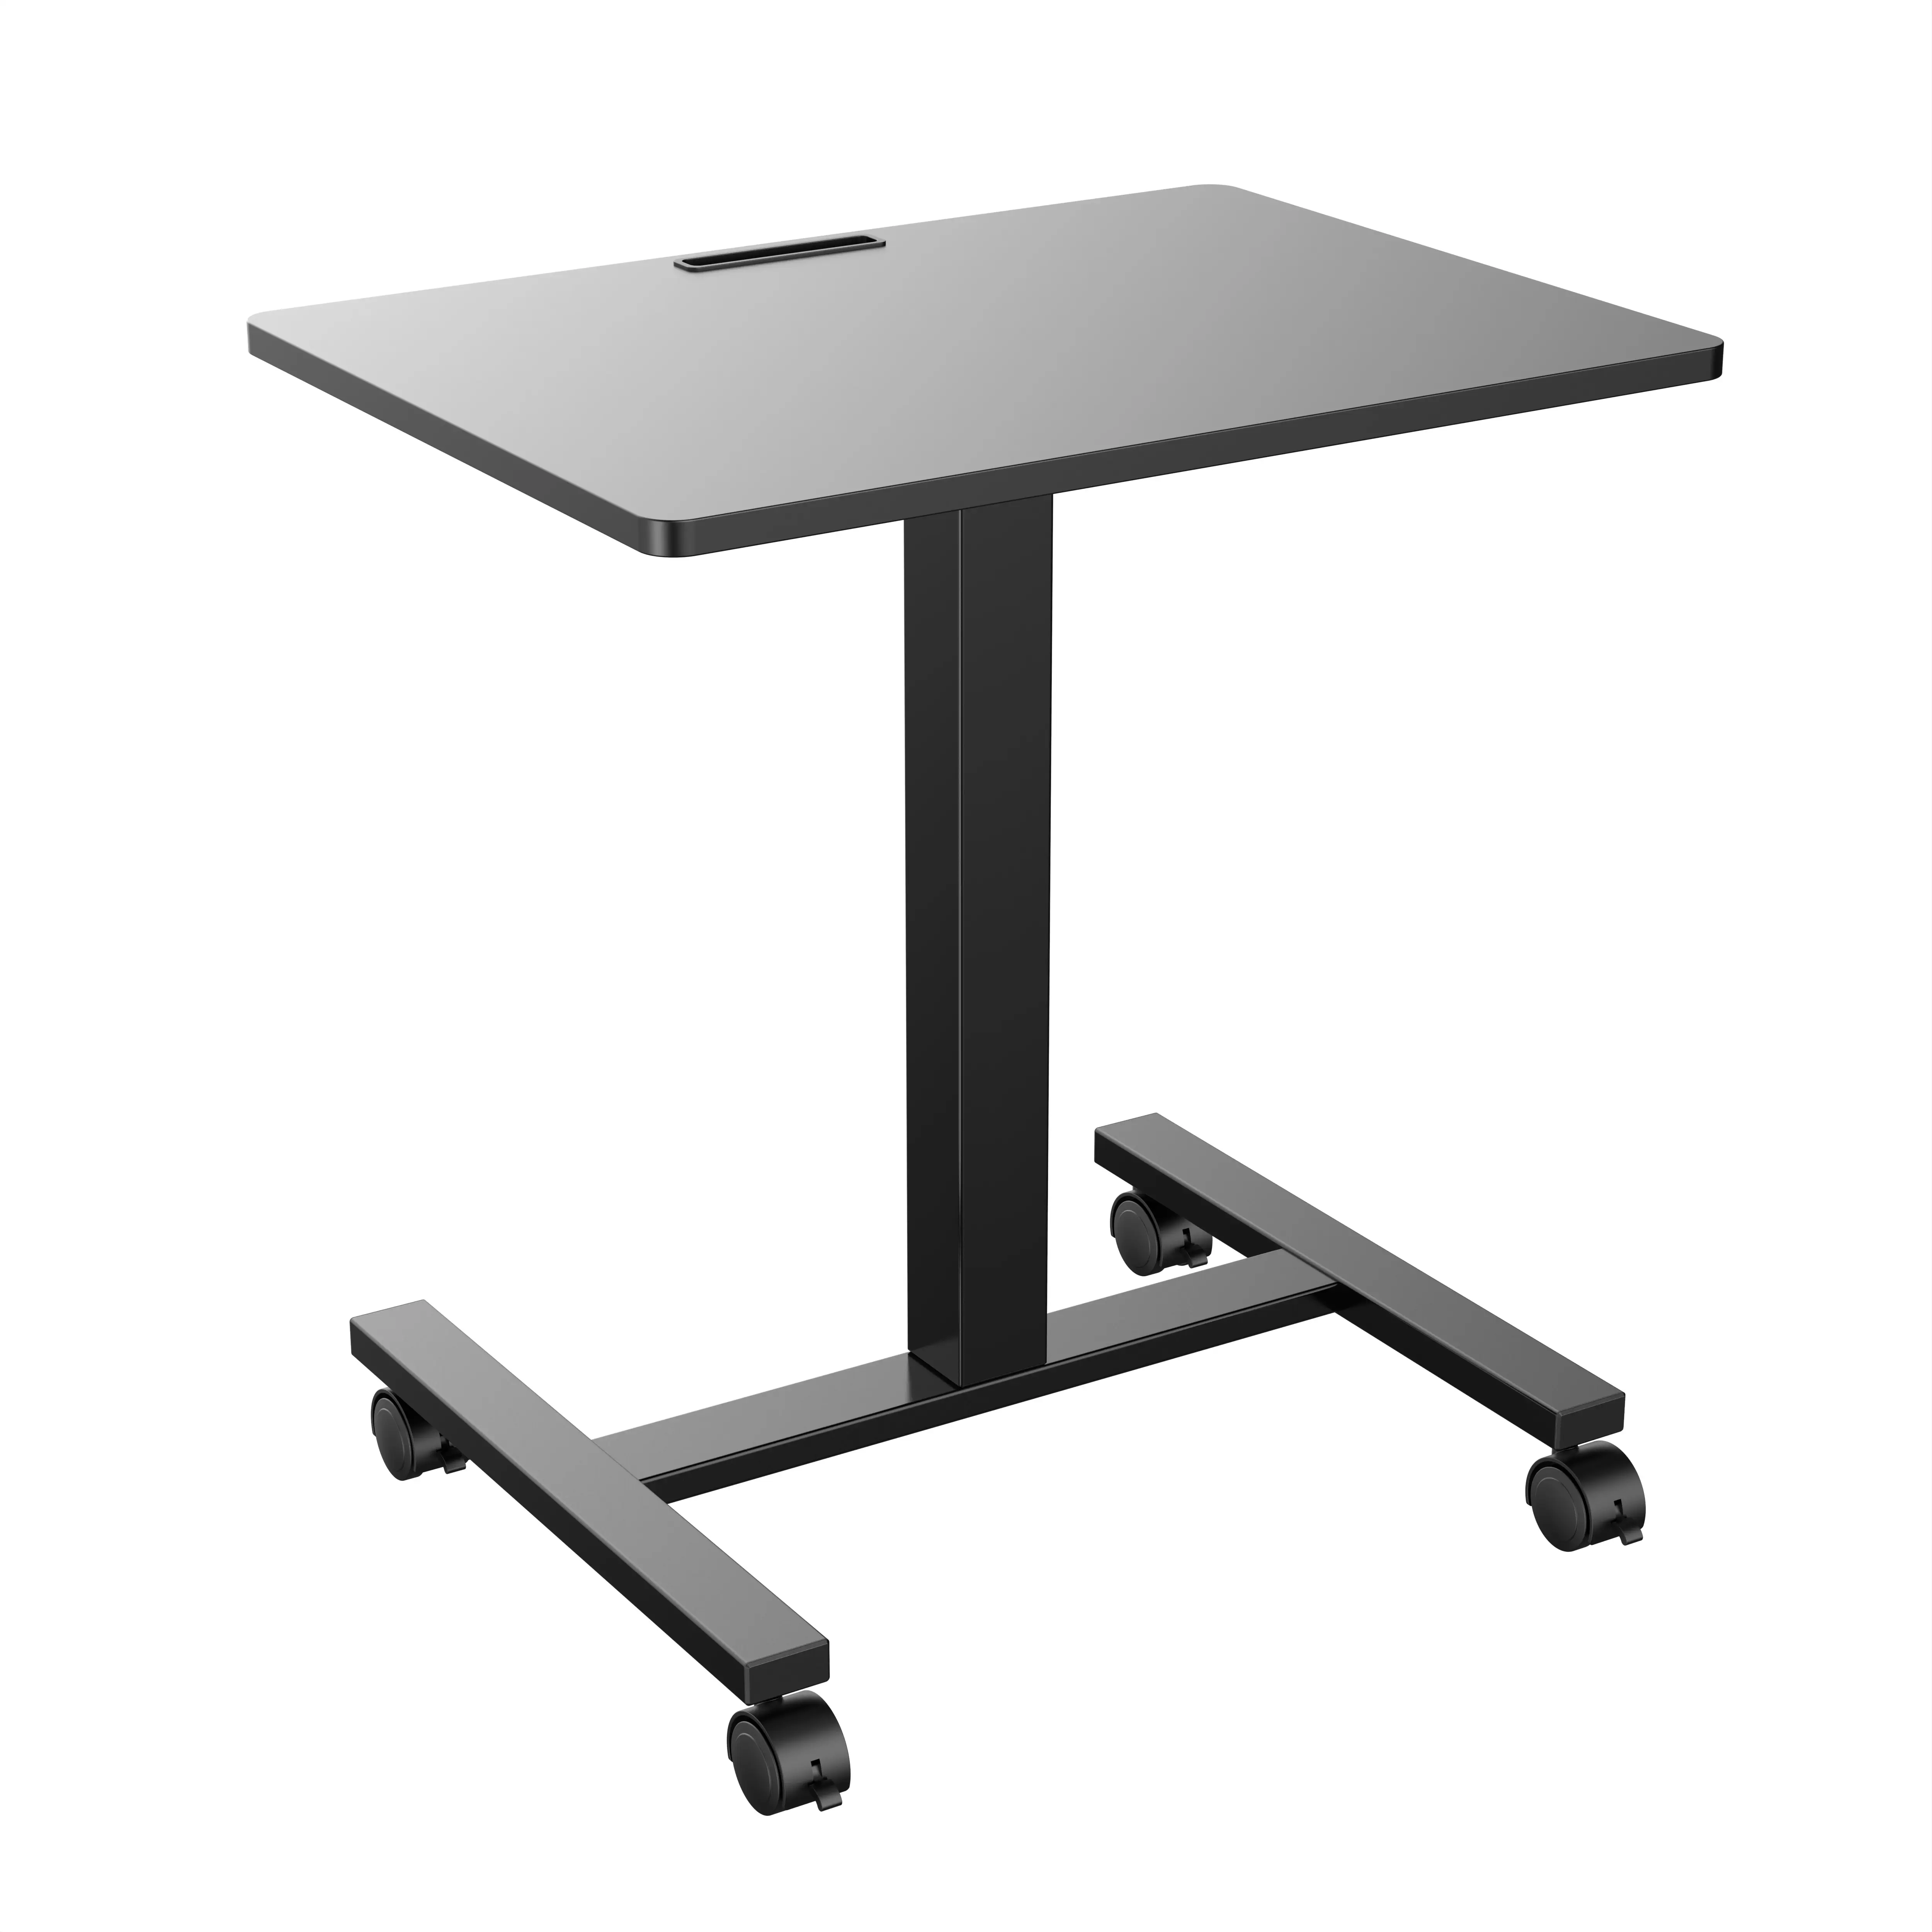 Mobile Height Adjustable Table Pneumatic Desk, Gas Spring Single Column Sit Stand Table with Wheels Mobile Laptop Desk Cart